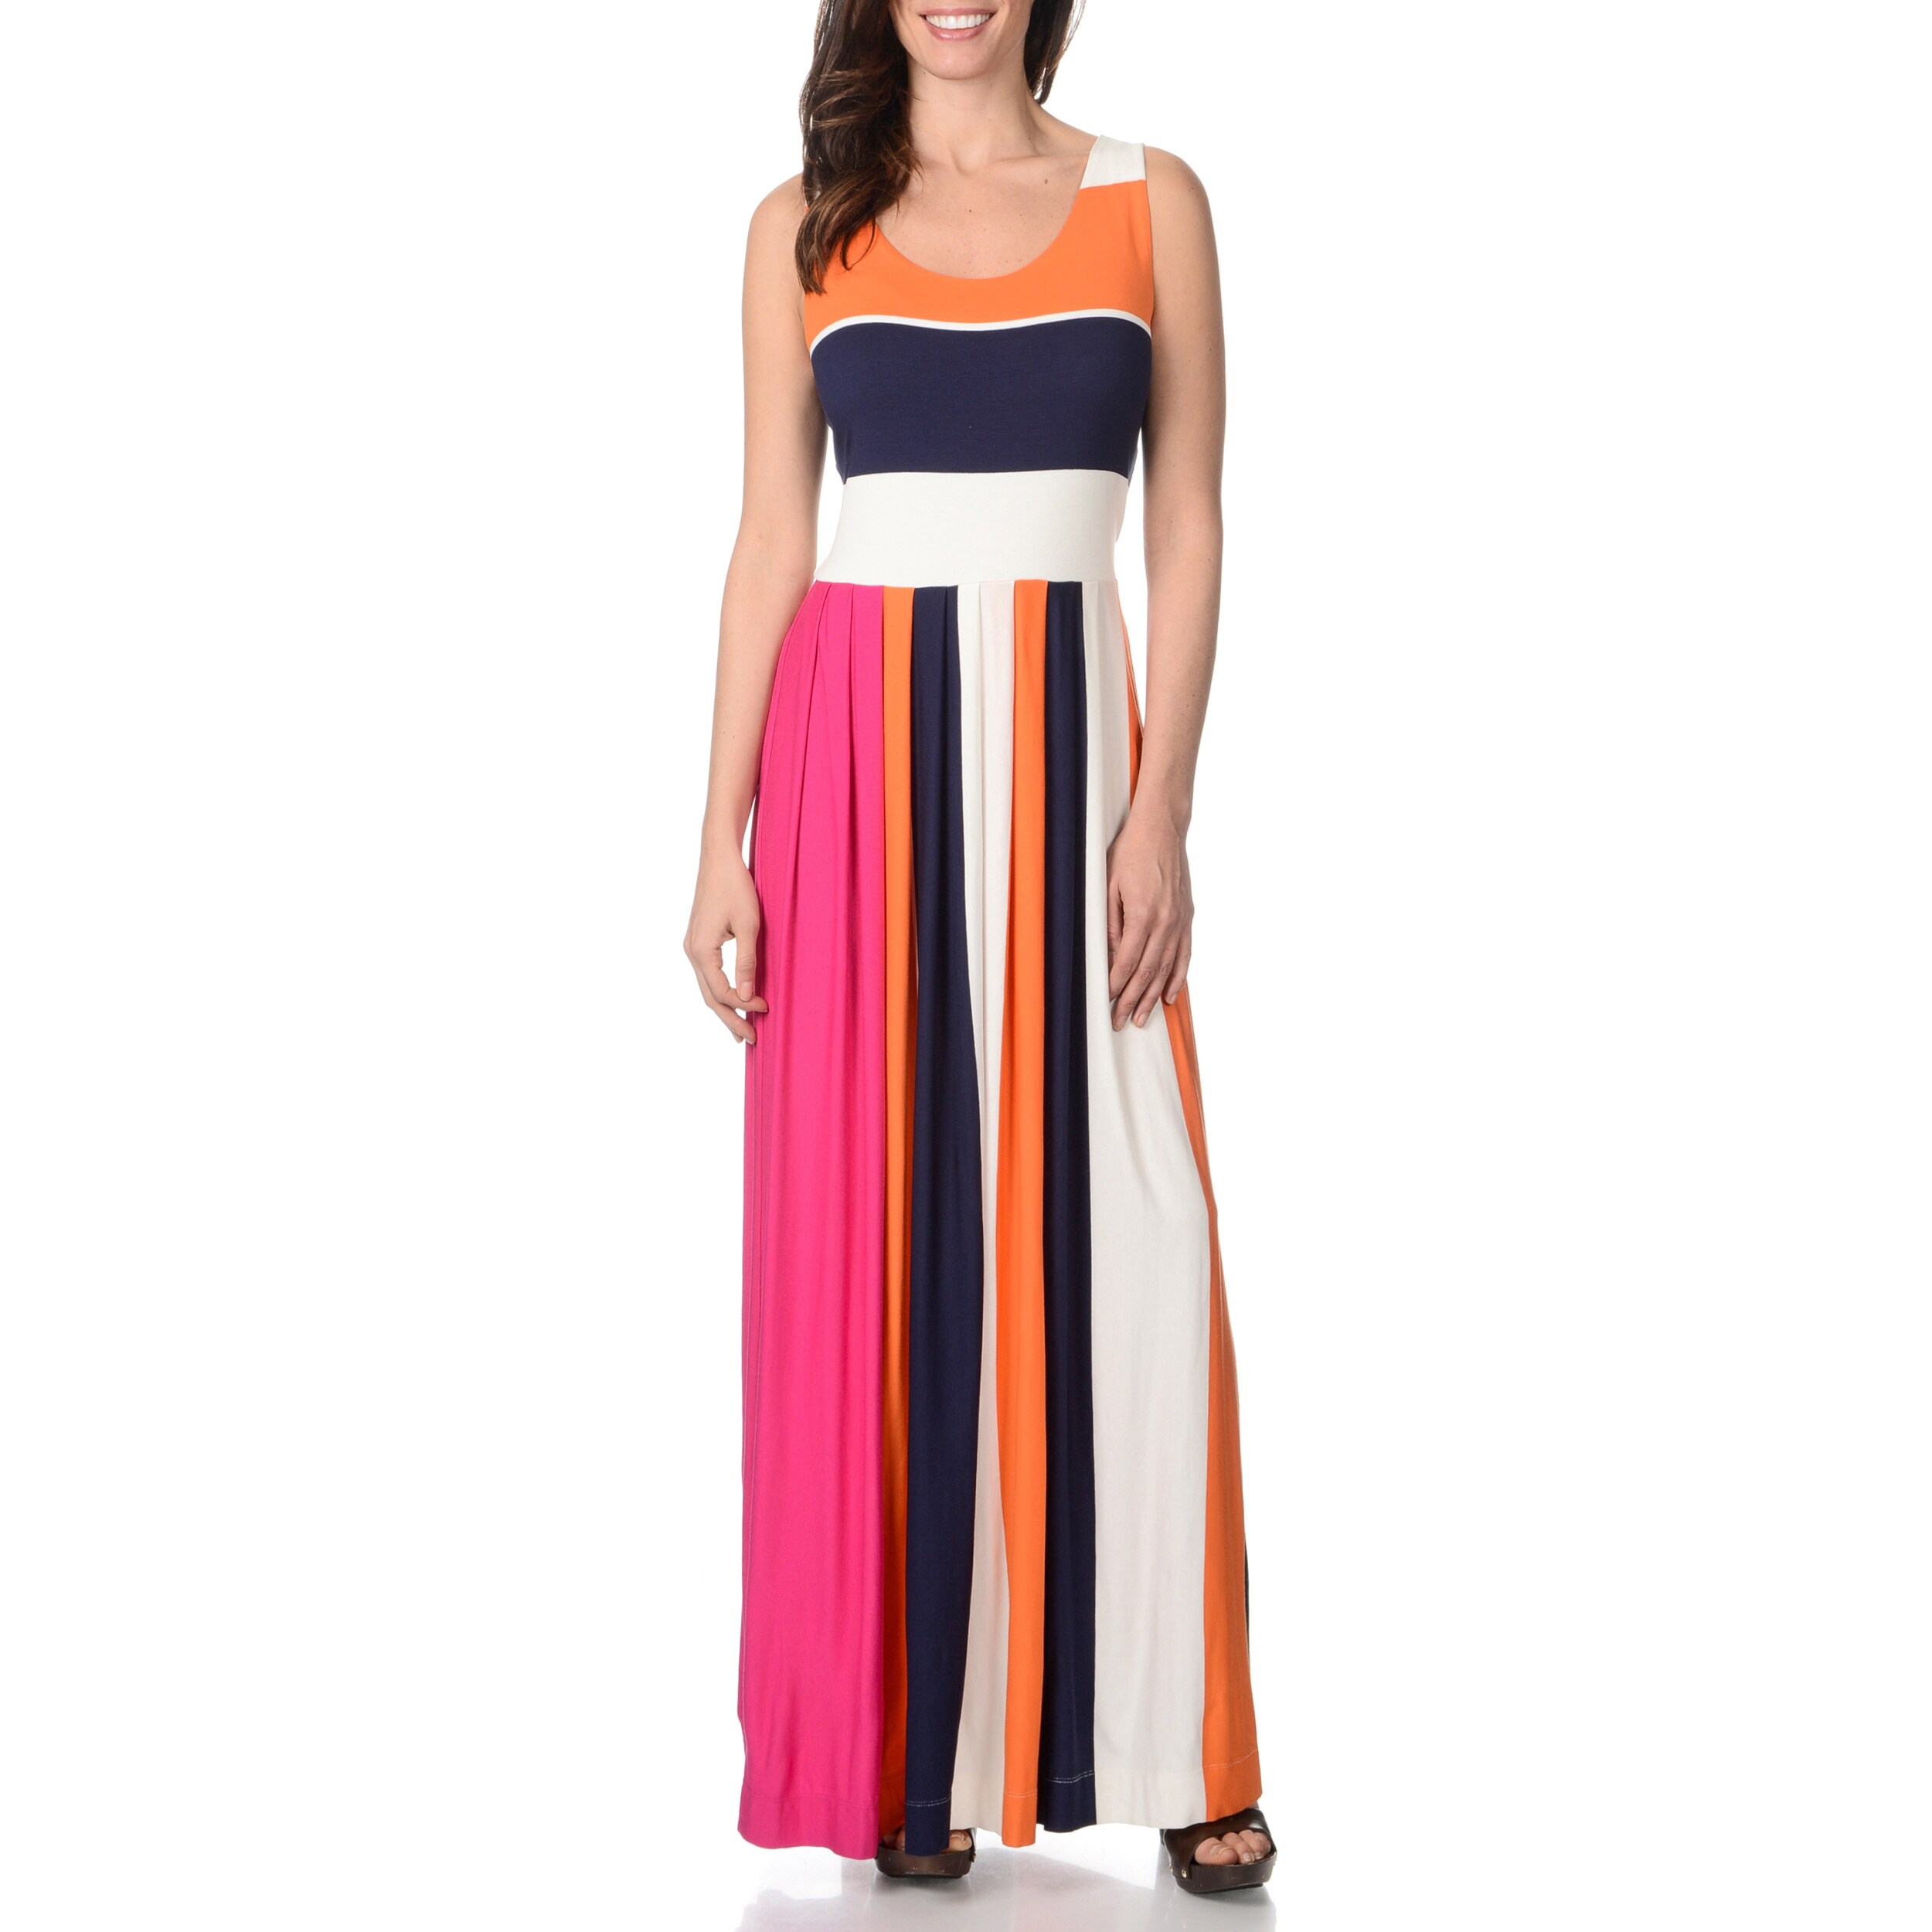 chelsea and theodore maxi dress